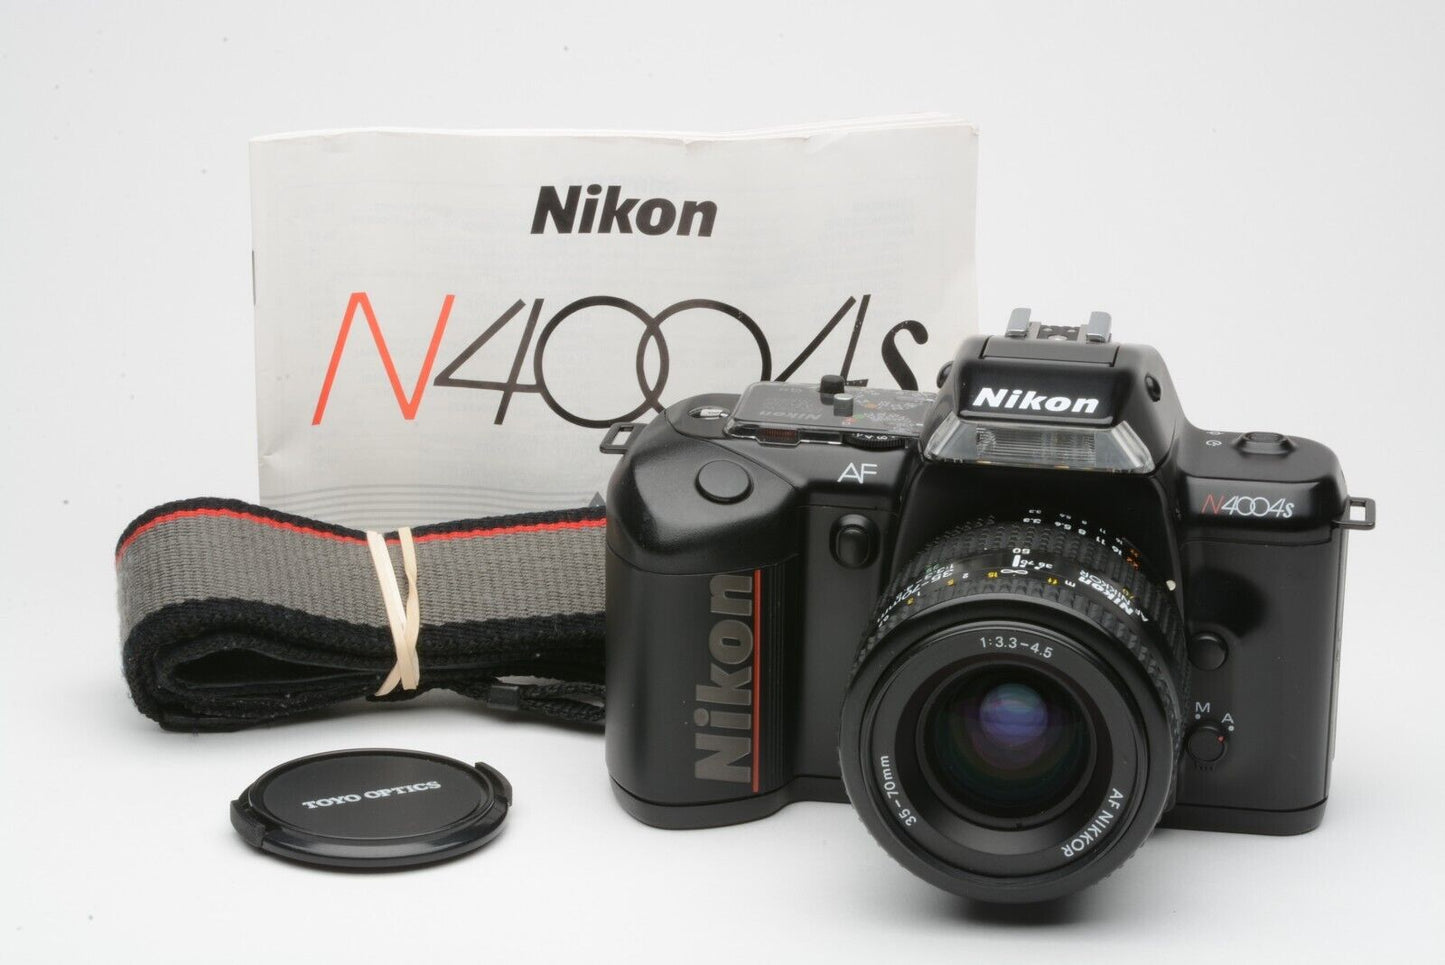 EXC++ NIKON N4004s 35mm BODY w/35-70mm ZOOM, STRAP+UV+MANUAL TESTED, WORKS GREAT